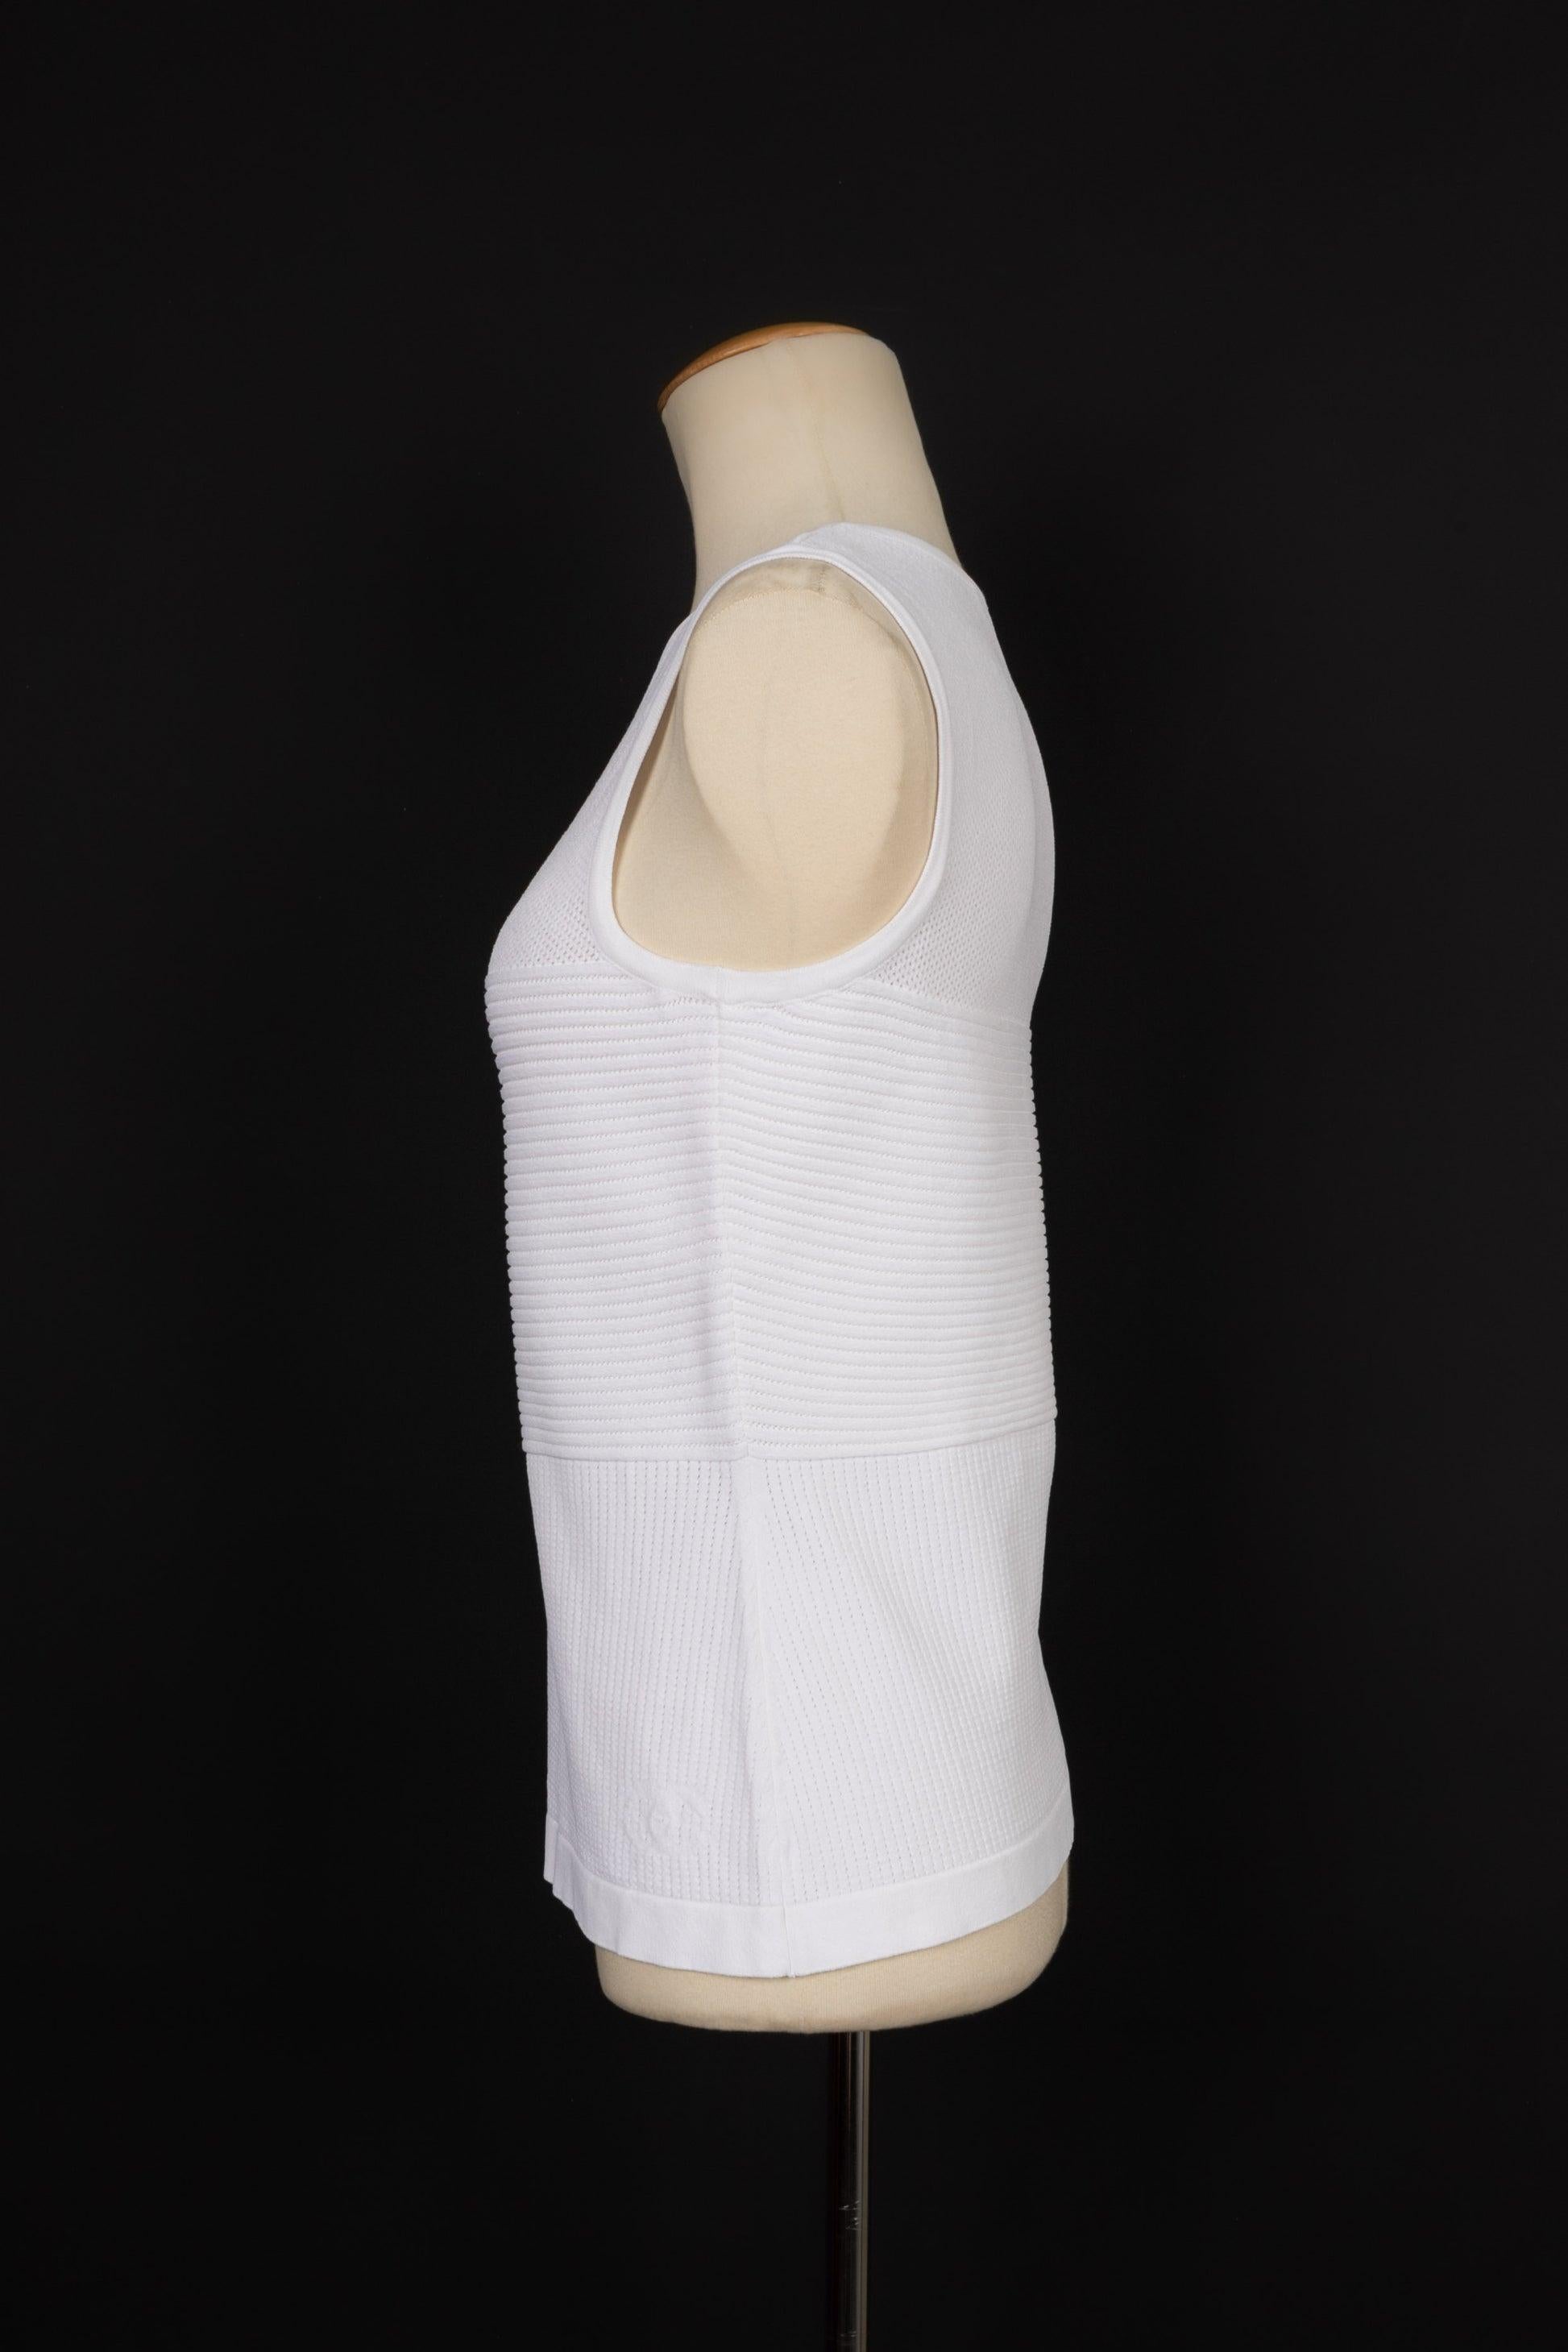 Chanel - White blended cotton top. No size nor composition label, it fits a 38FR.

Additional information:
Condition: Very good condition
Dimensions: Chest: 42 cm - Length: 58 cm

Seller Reference: FH169
